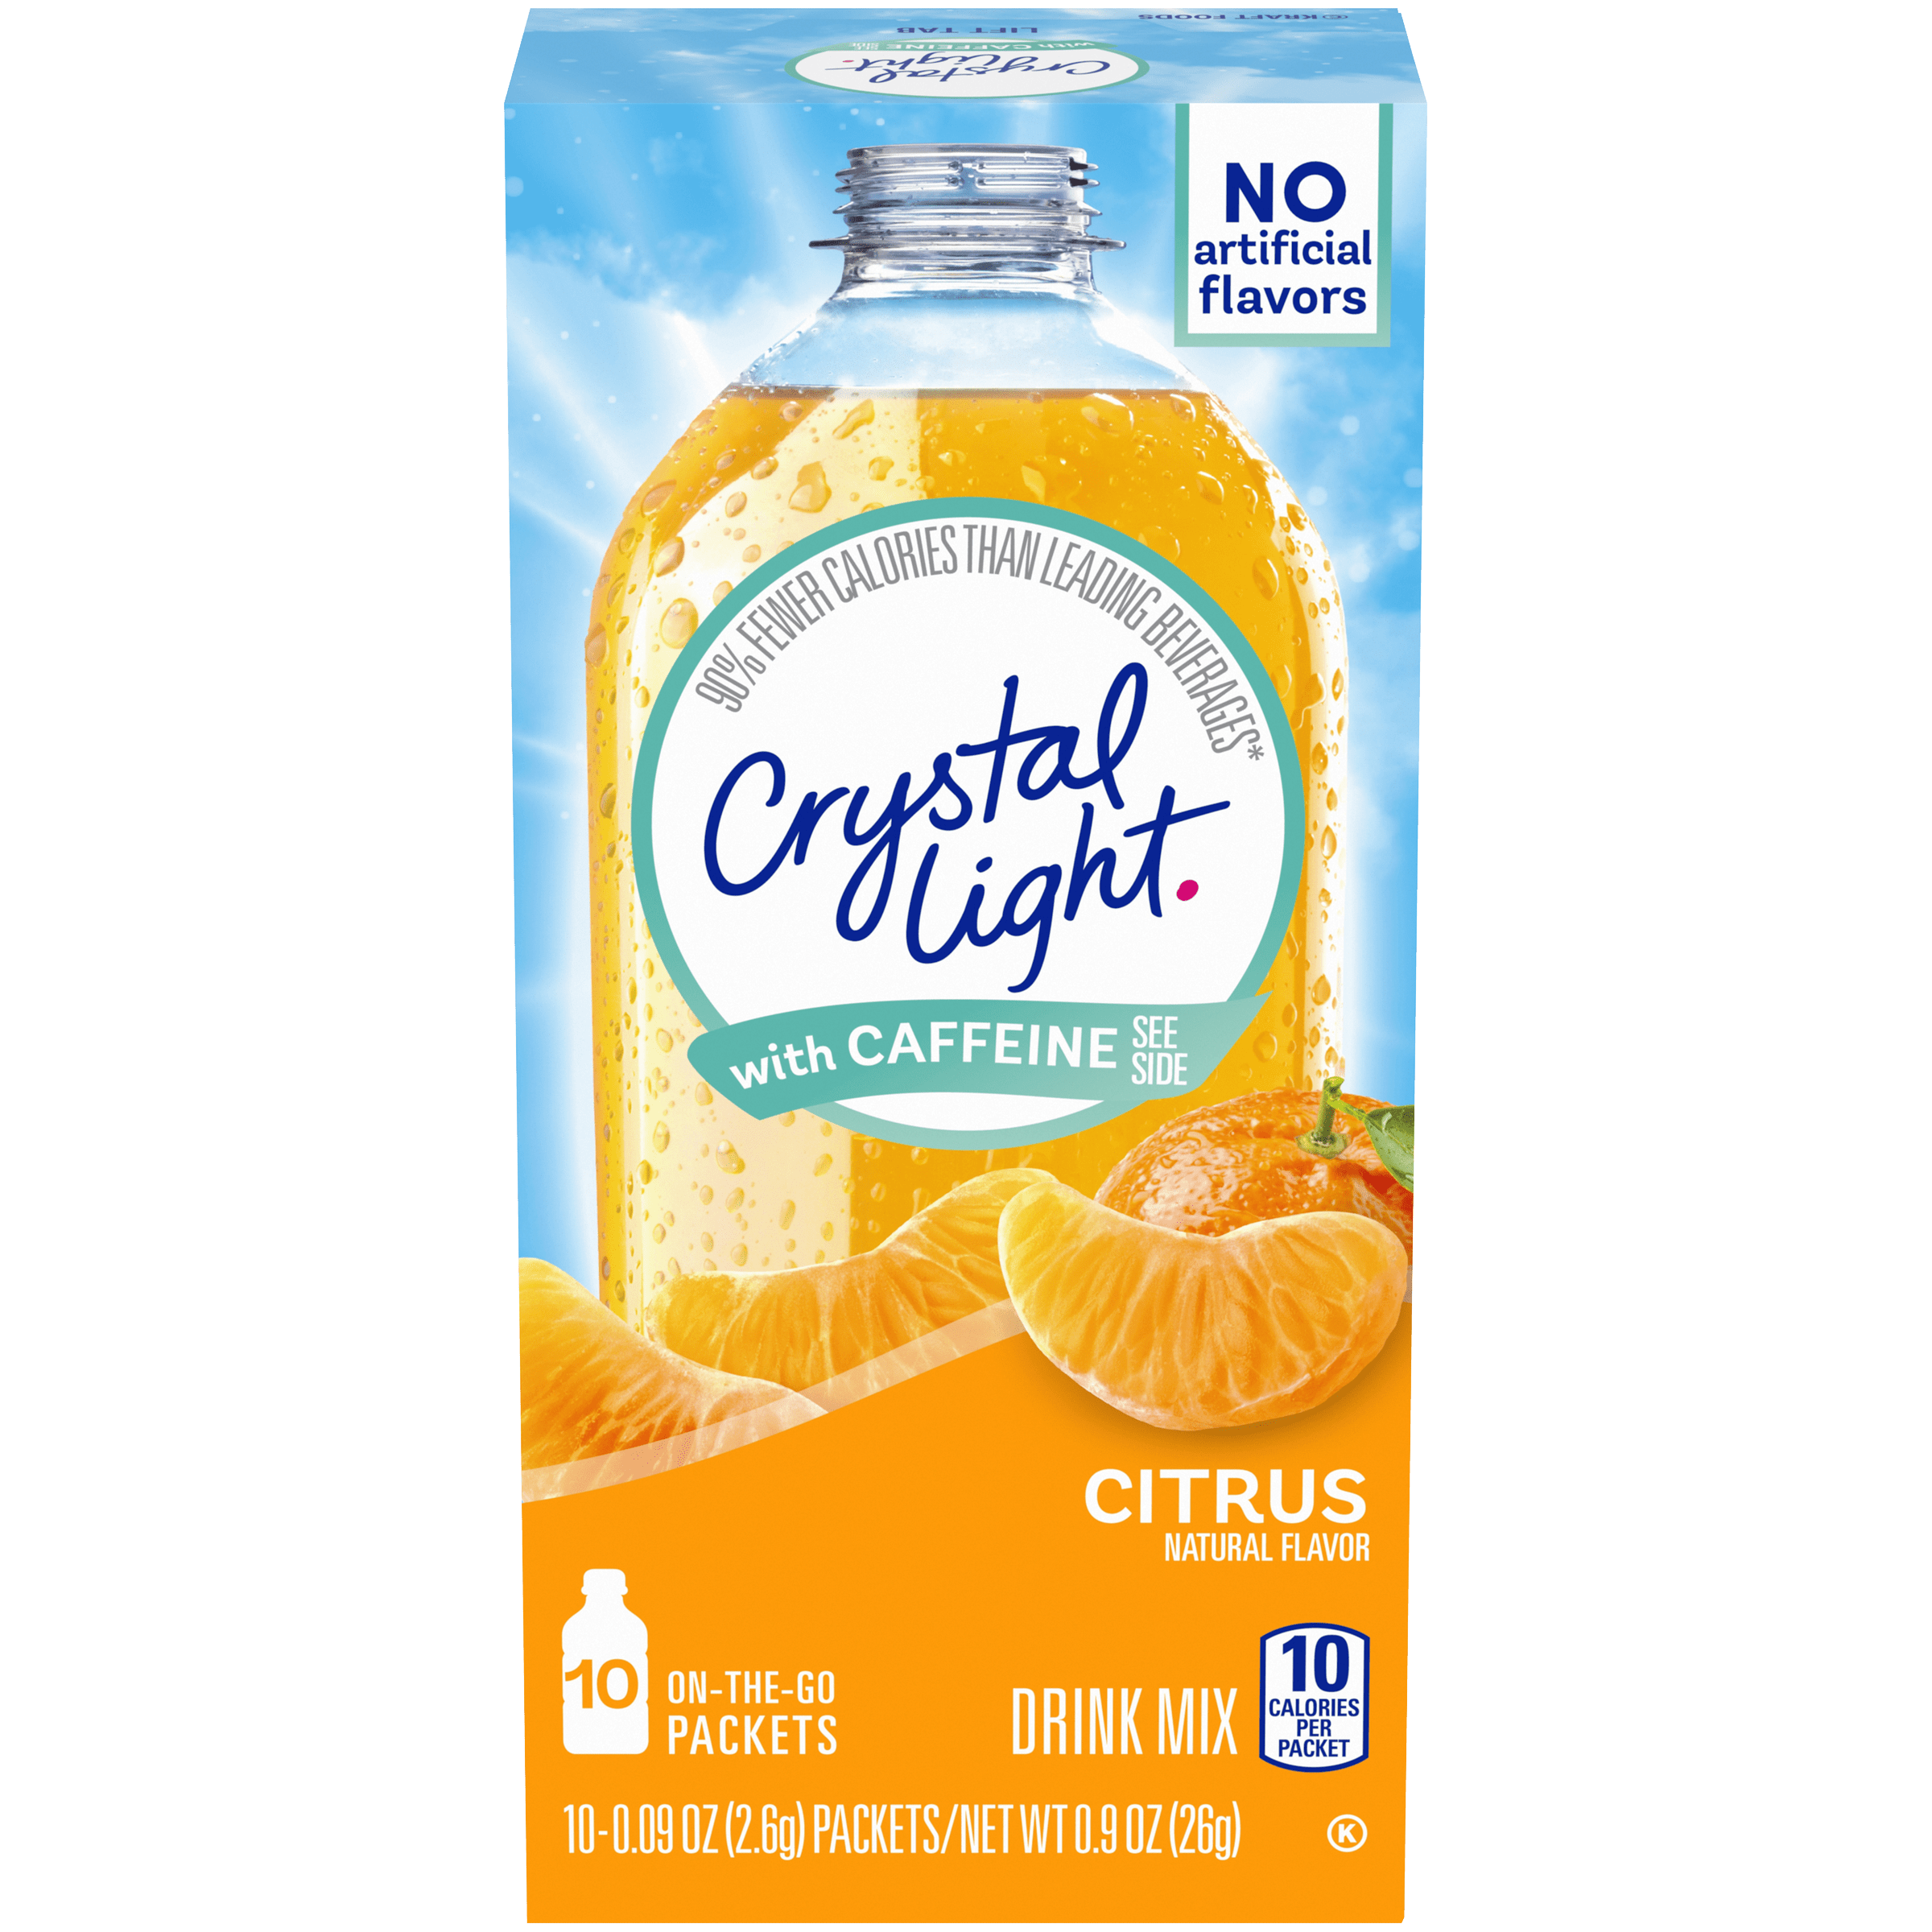 Citrus Naturally Flavored Powdered Drink Mix with Caffeine